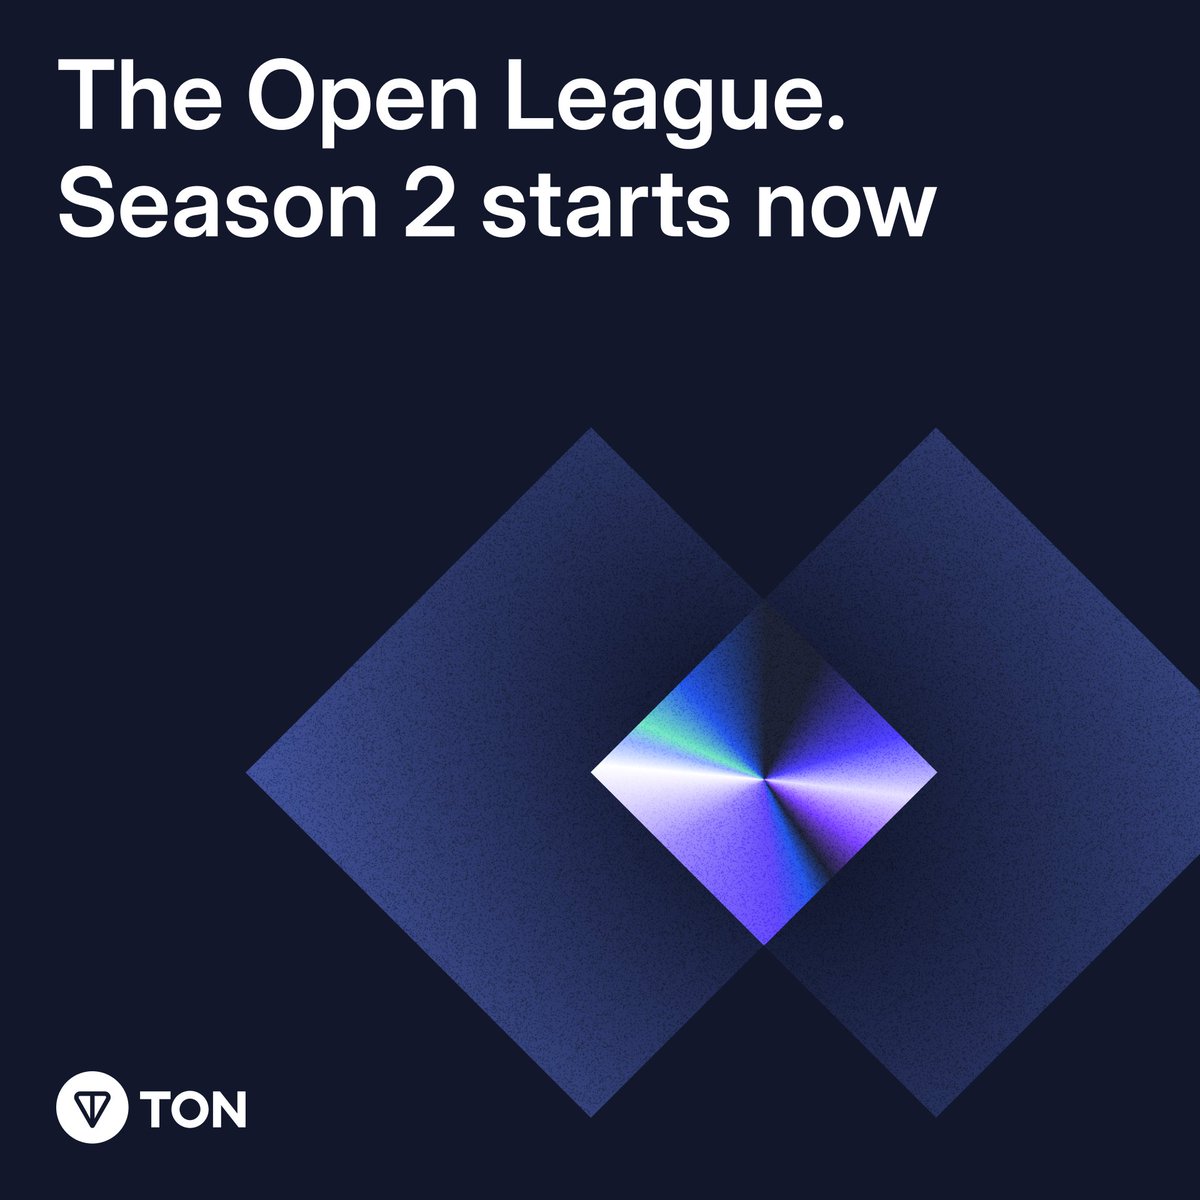 The Open League Season 2 Starts Today Open League S1 contributed to ATHs on every metric in April. With a massive $9million distributed to all 894k TON users participating in S1! MAUs = 1.5million (up 7%) TVL = $159.52 million (up 59%) DEX traders = 185k (up 21%)